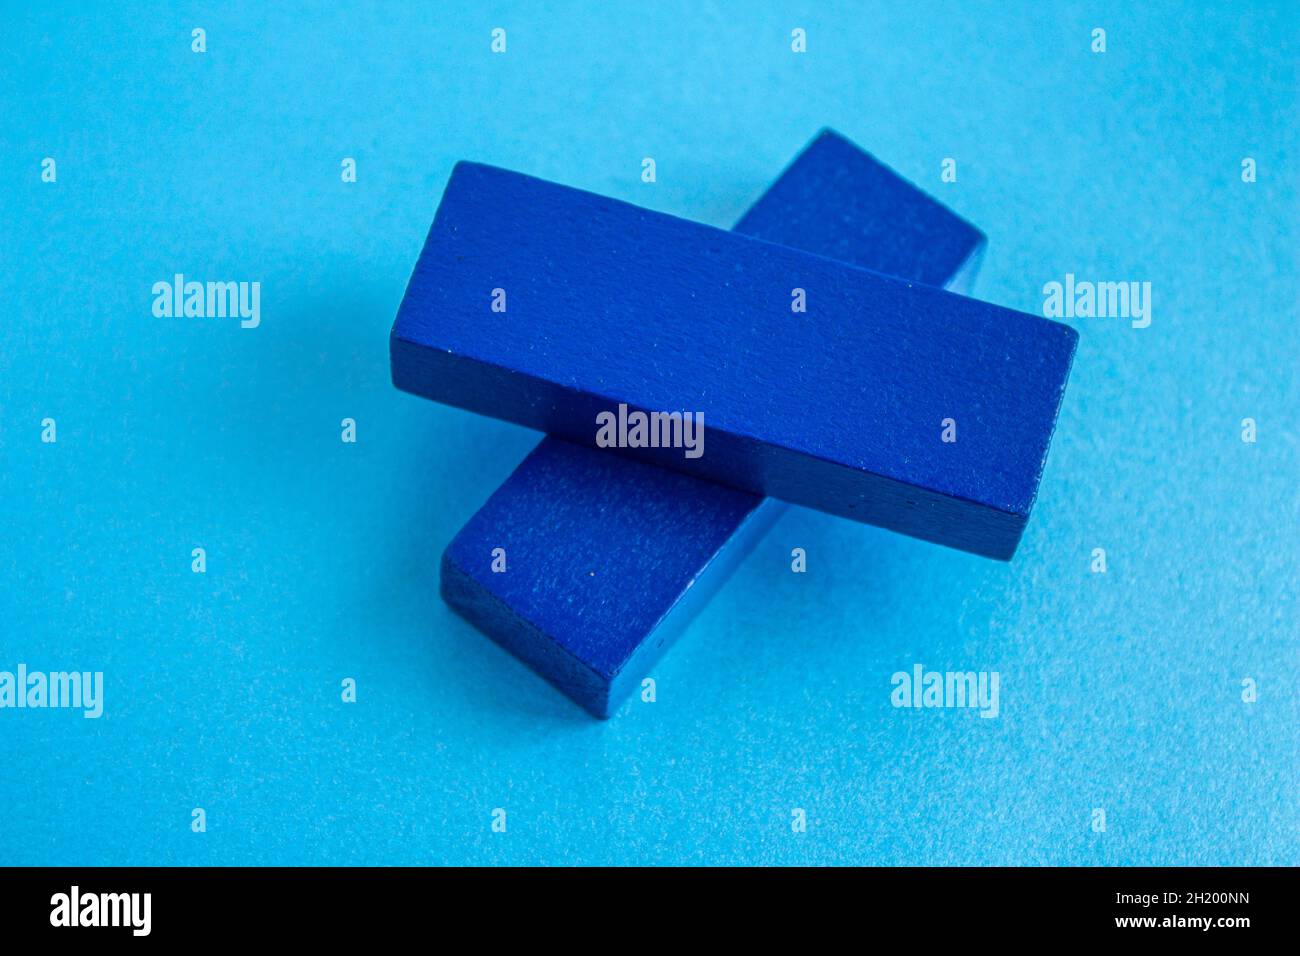 Navy blue wooden blocks, top view of navy blue wooden blocks isolated on blue background. Stock Photo